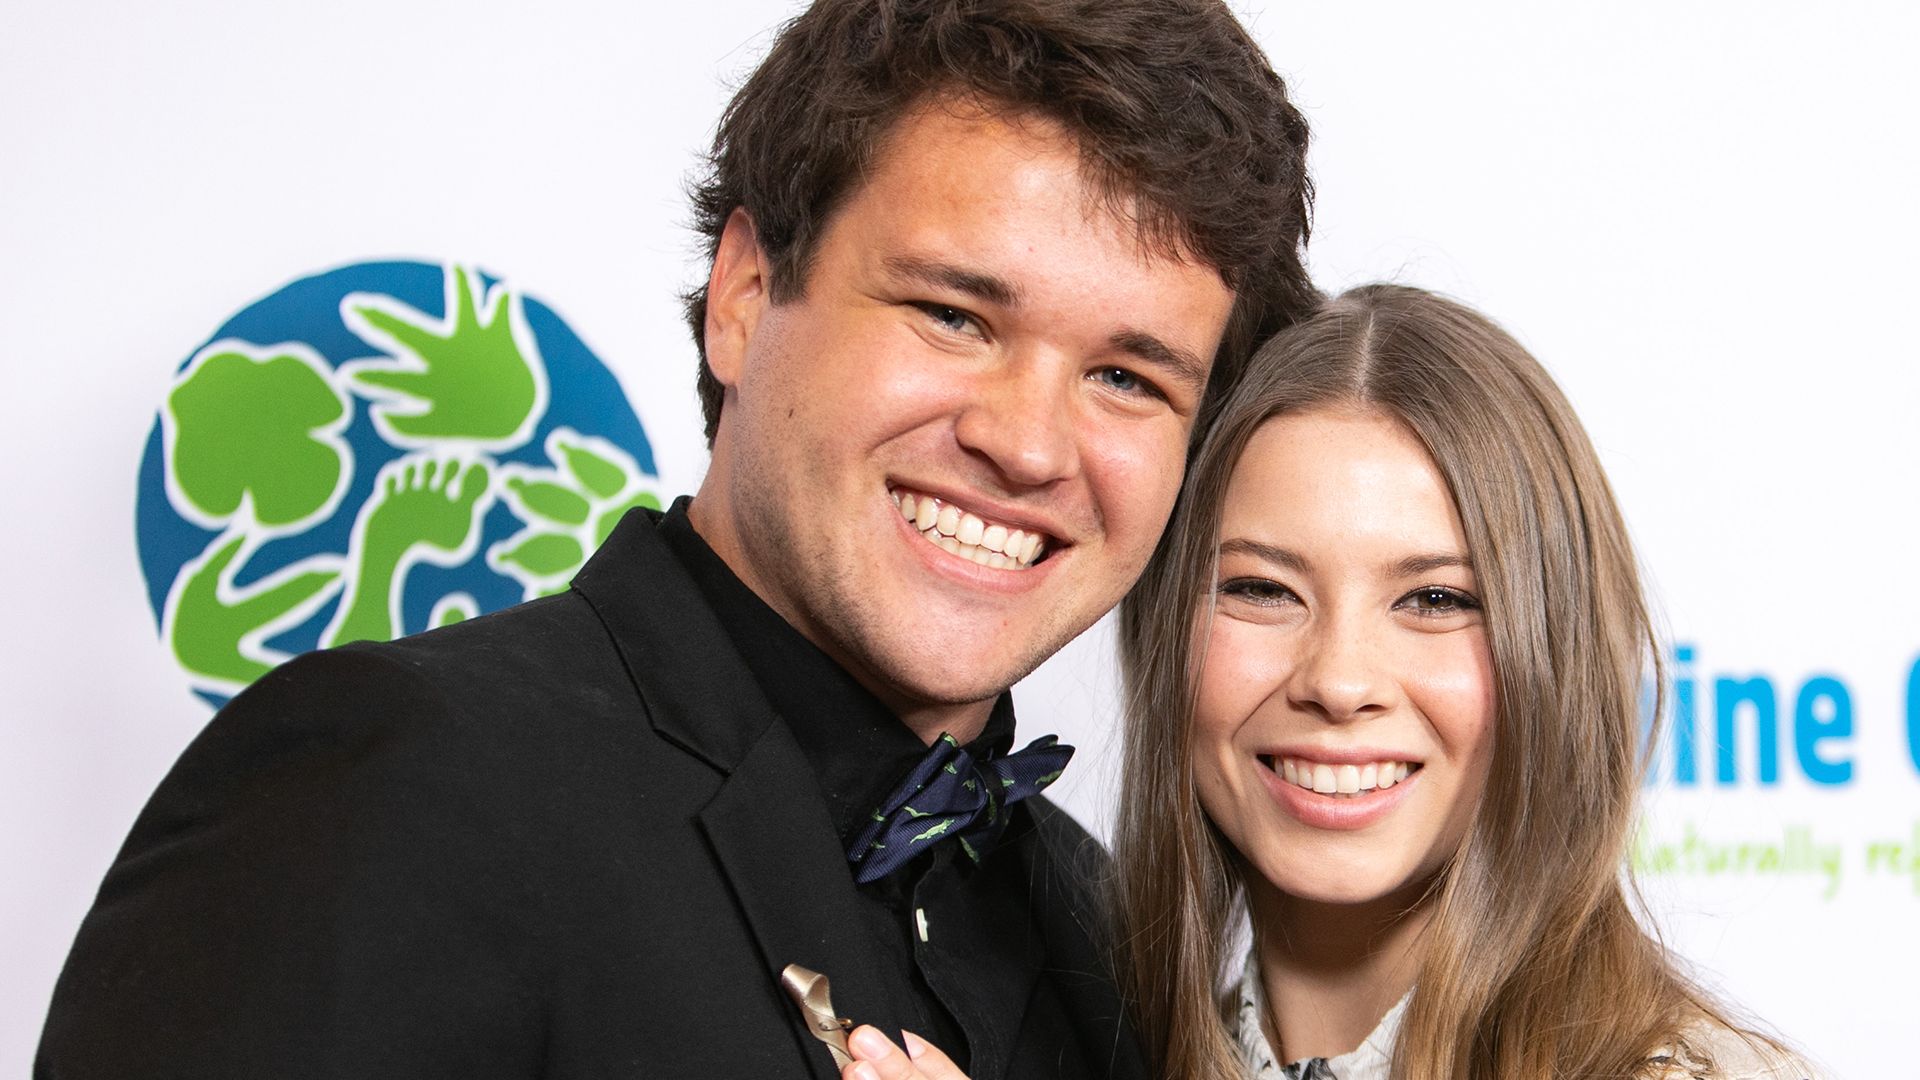 Bindi Irwin looks happy as she places a tender hand on Chandler's chest at an event